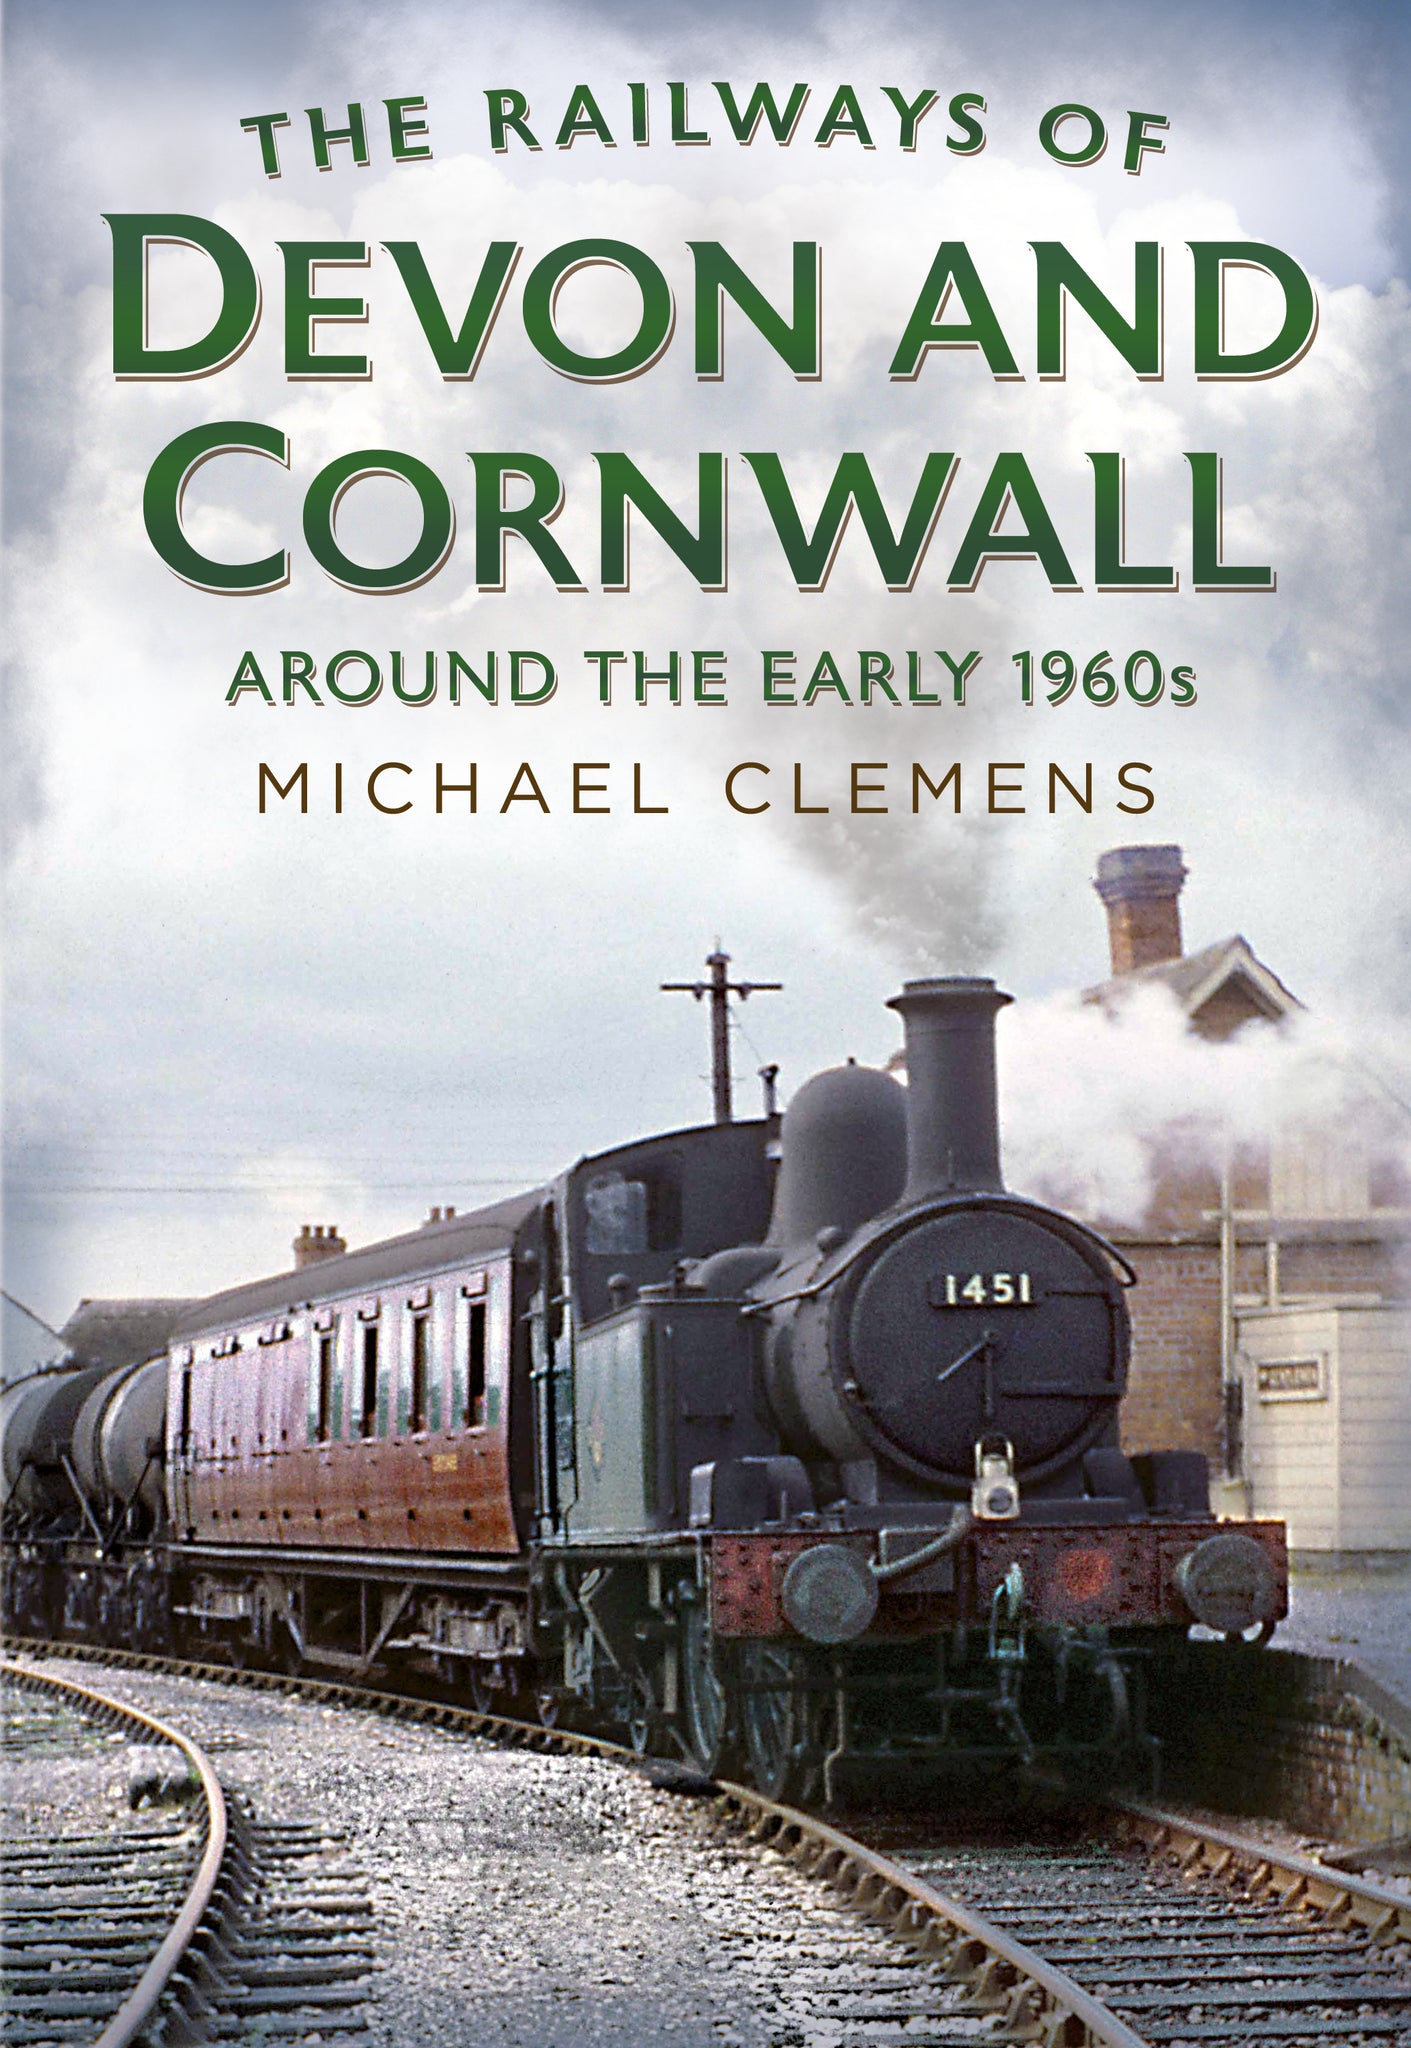 The Railways of Devon and Cornwall Around the Early 1960s (hardback edition)